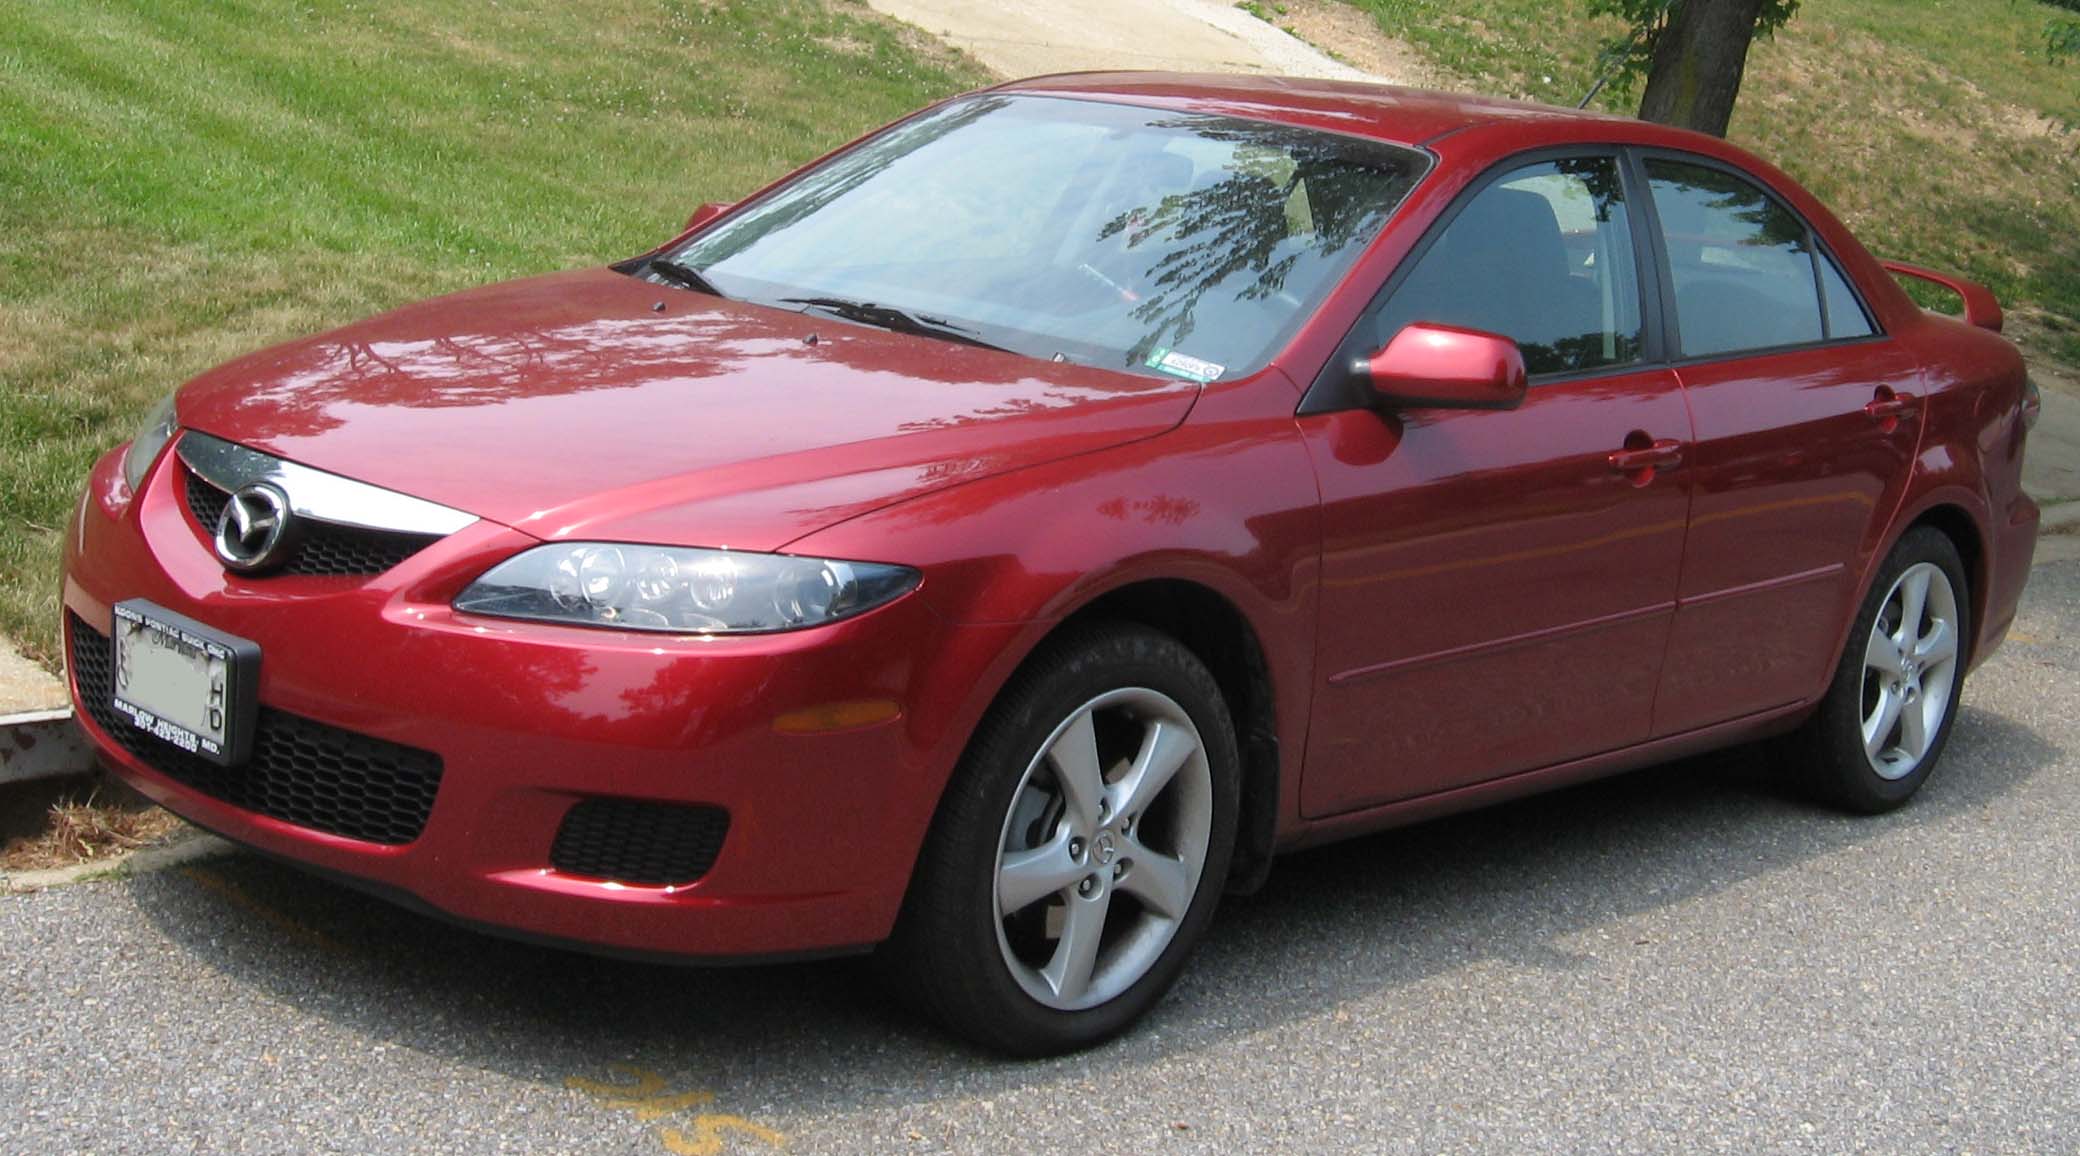 Mazda 626 2006 Review, Amazing Pictures and Images Look